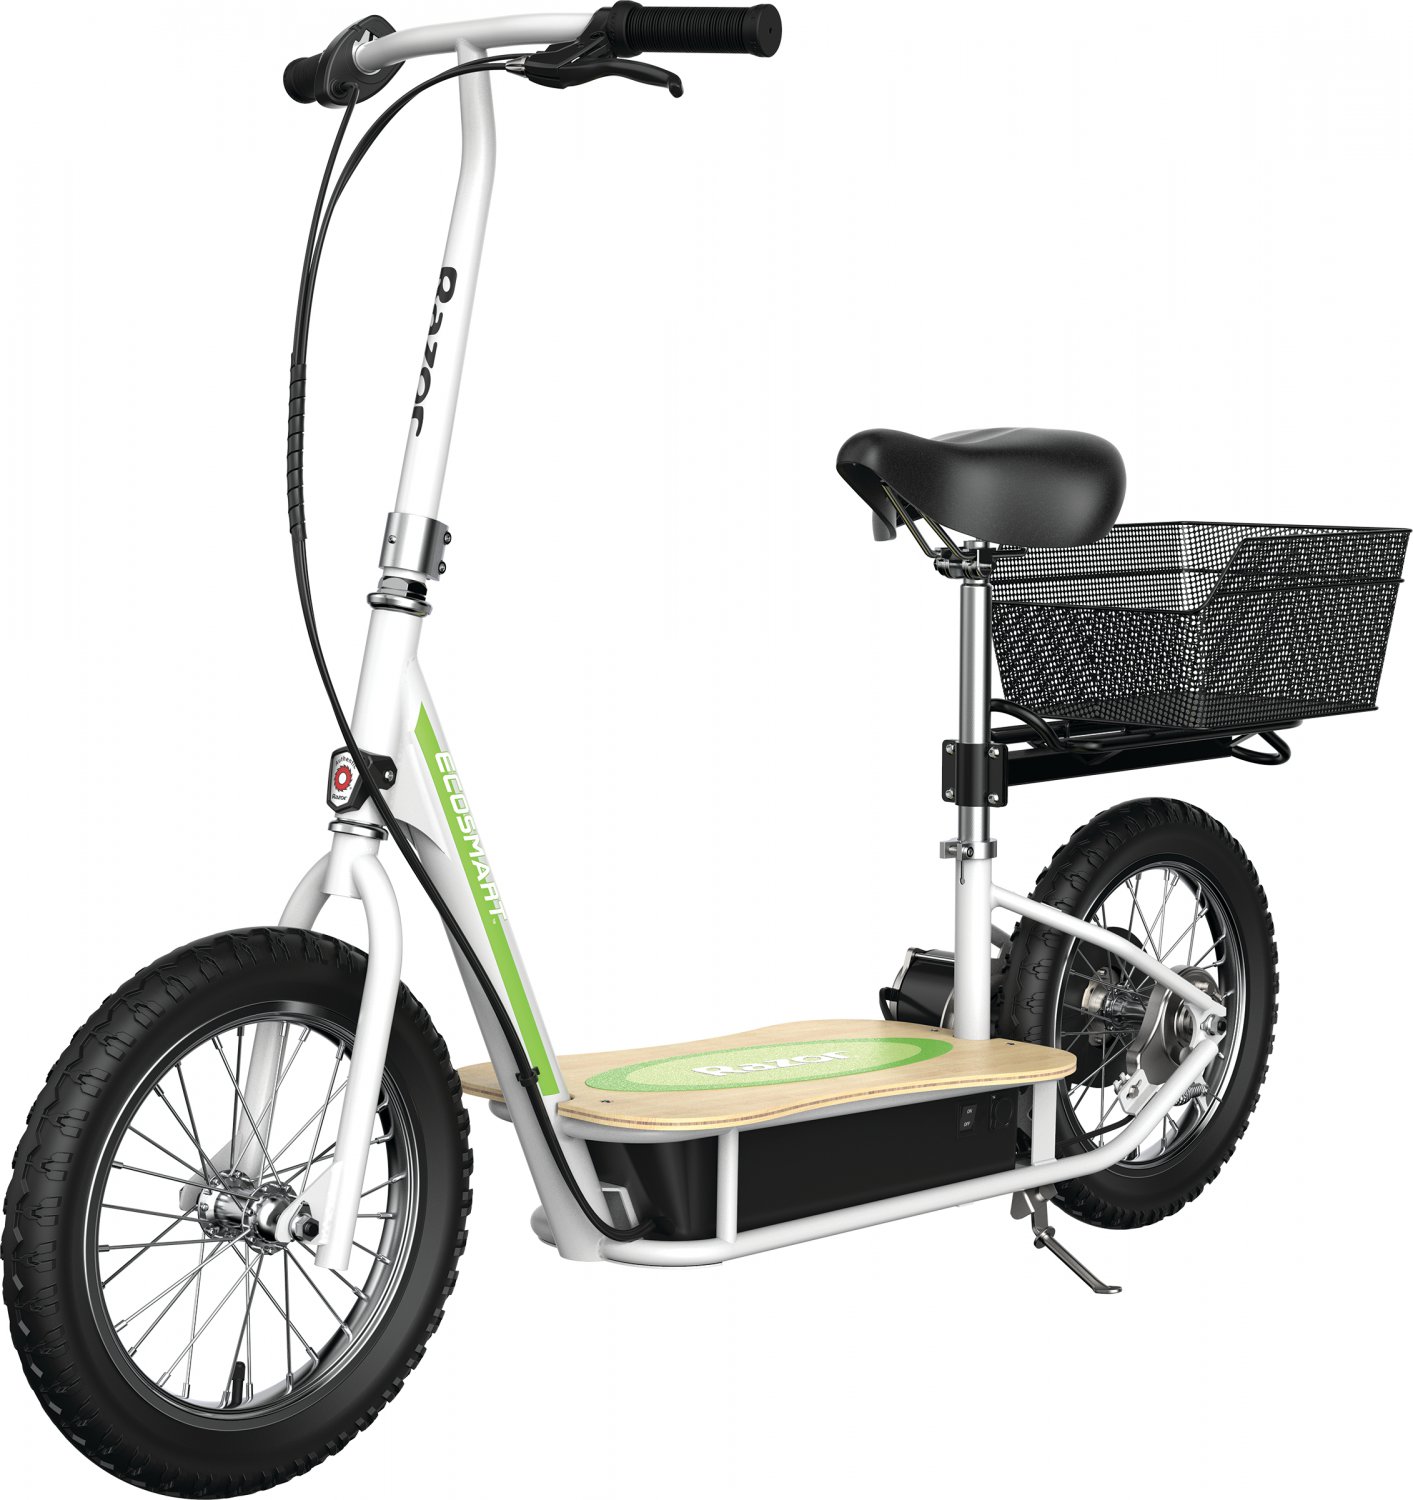 Razor EcoSmart Metro Electric Scooter â�� Padded Seat, 16" Air-Filled Tires, 500w High-Torque Motor